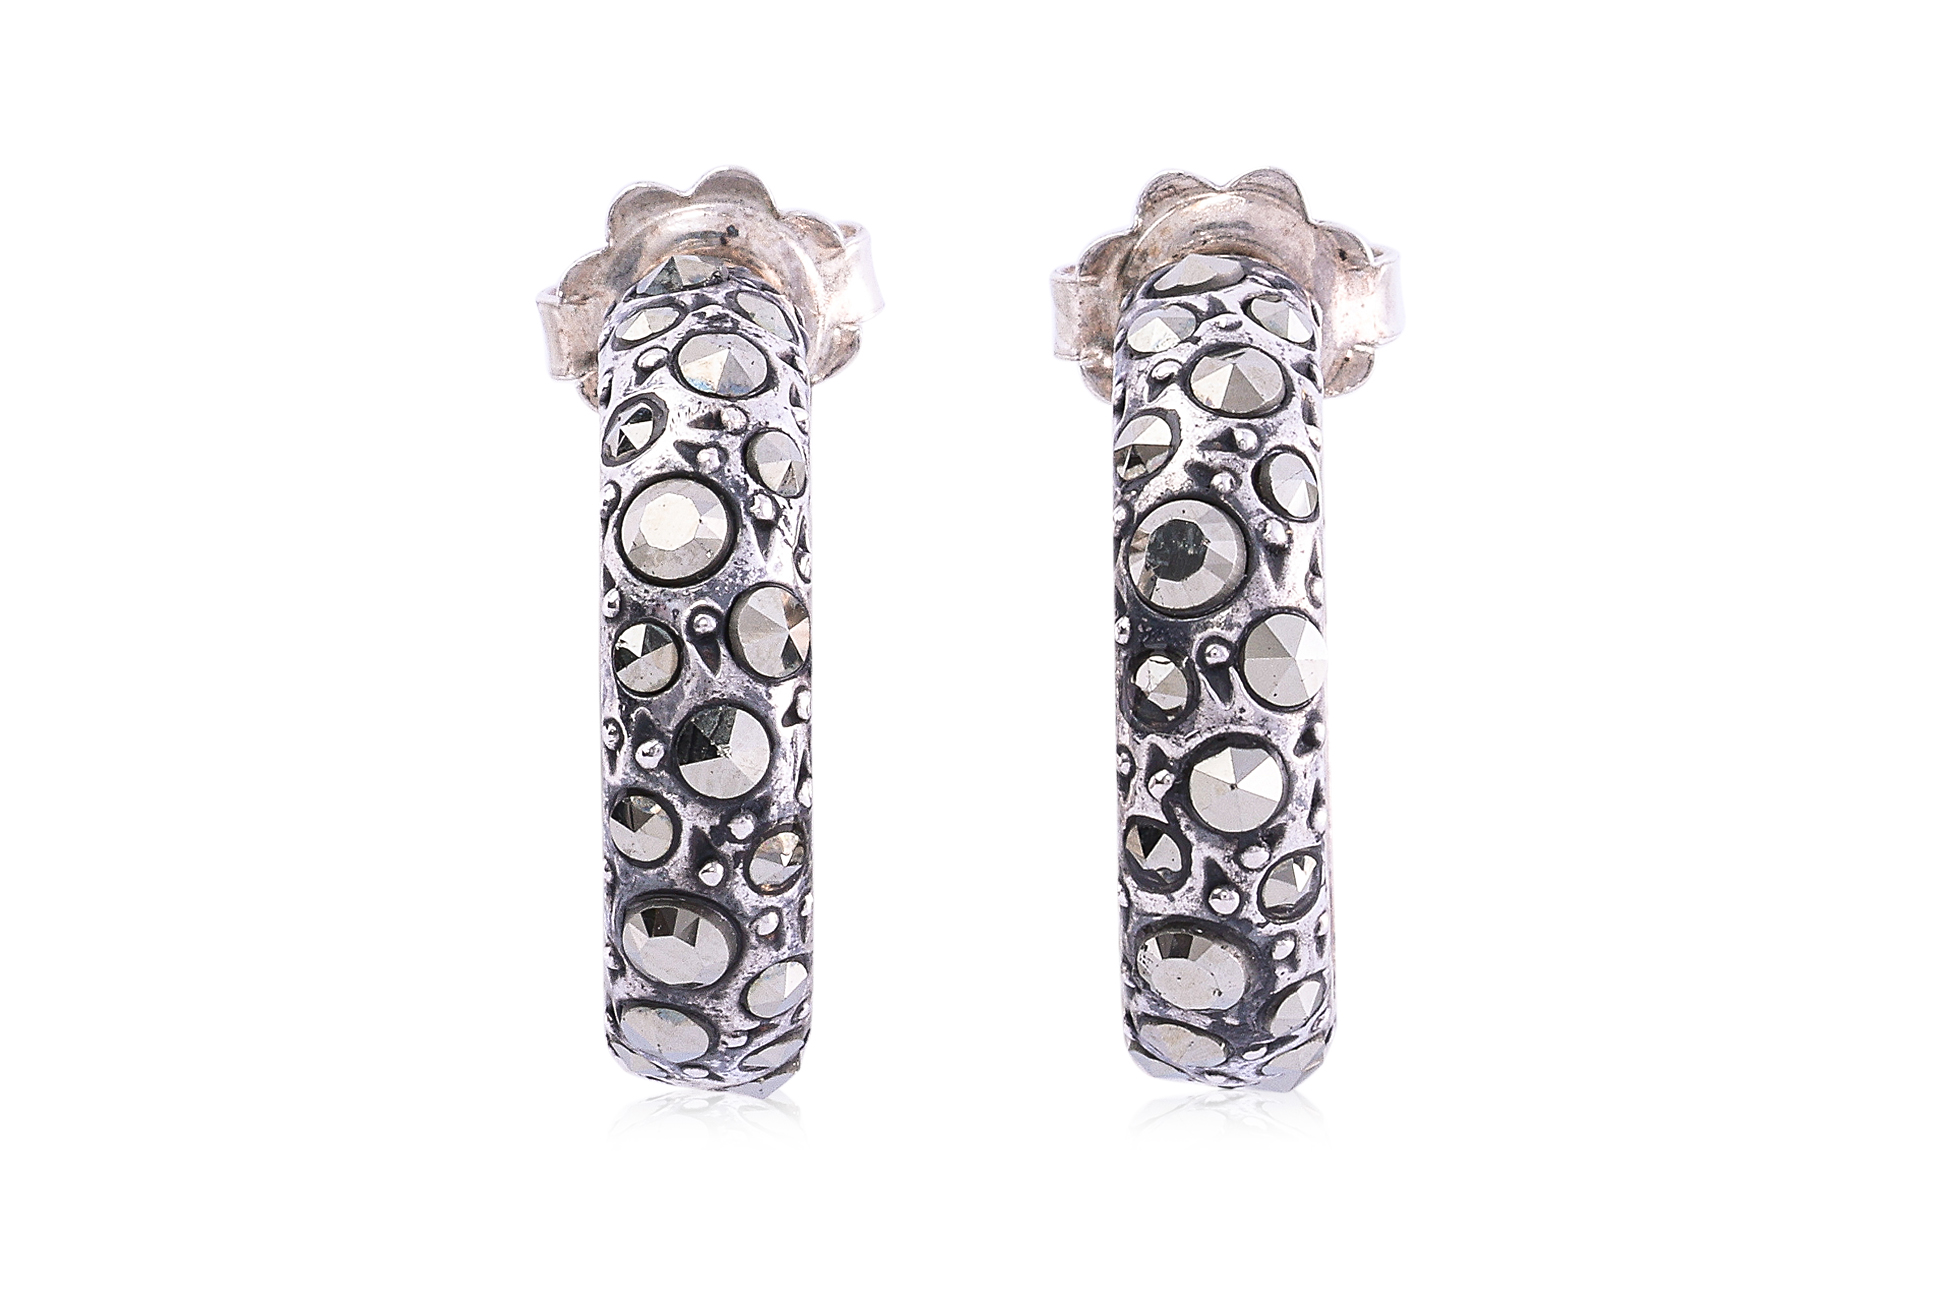 A PAIR OF POMELLATO SILVER STUD EARRINGS - Image 2 of 2